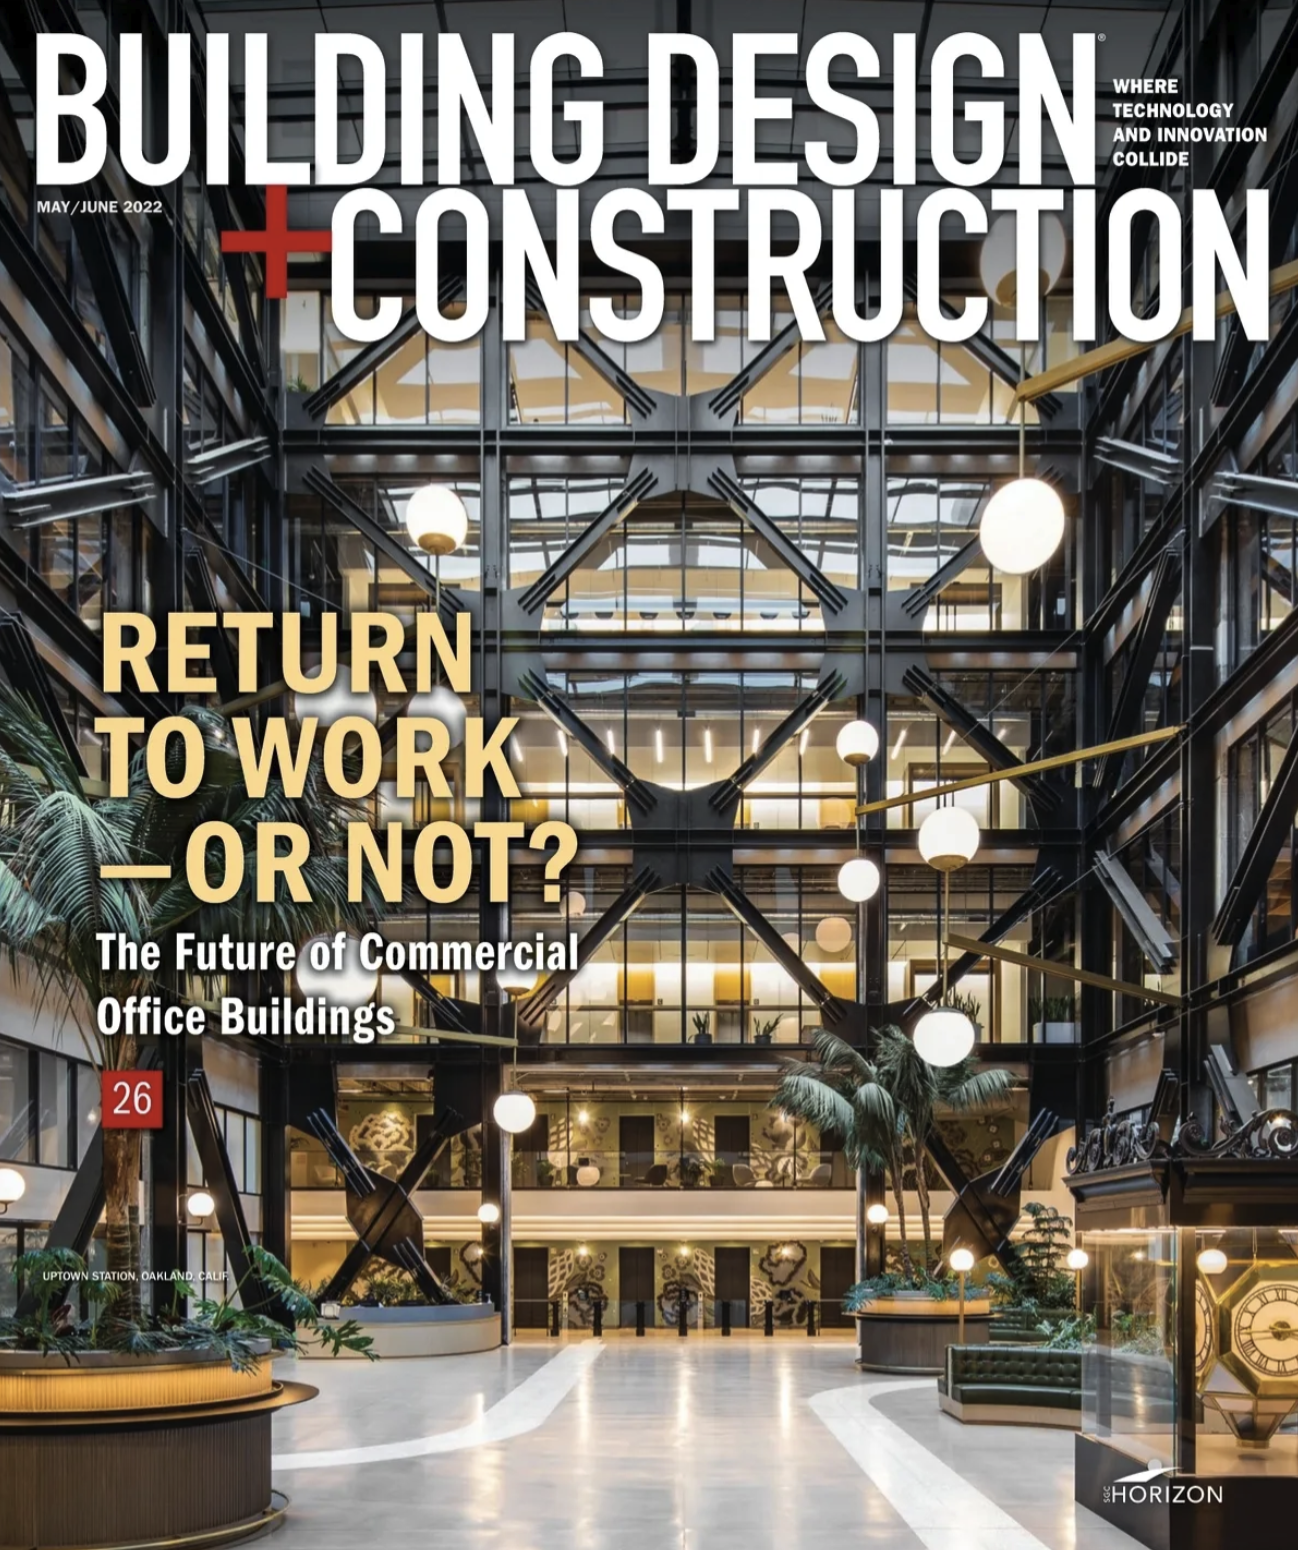 May/June 2022 issues of Building Design and Construction magazine SGC Horizon